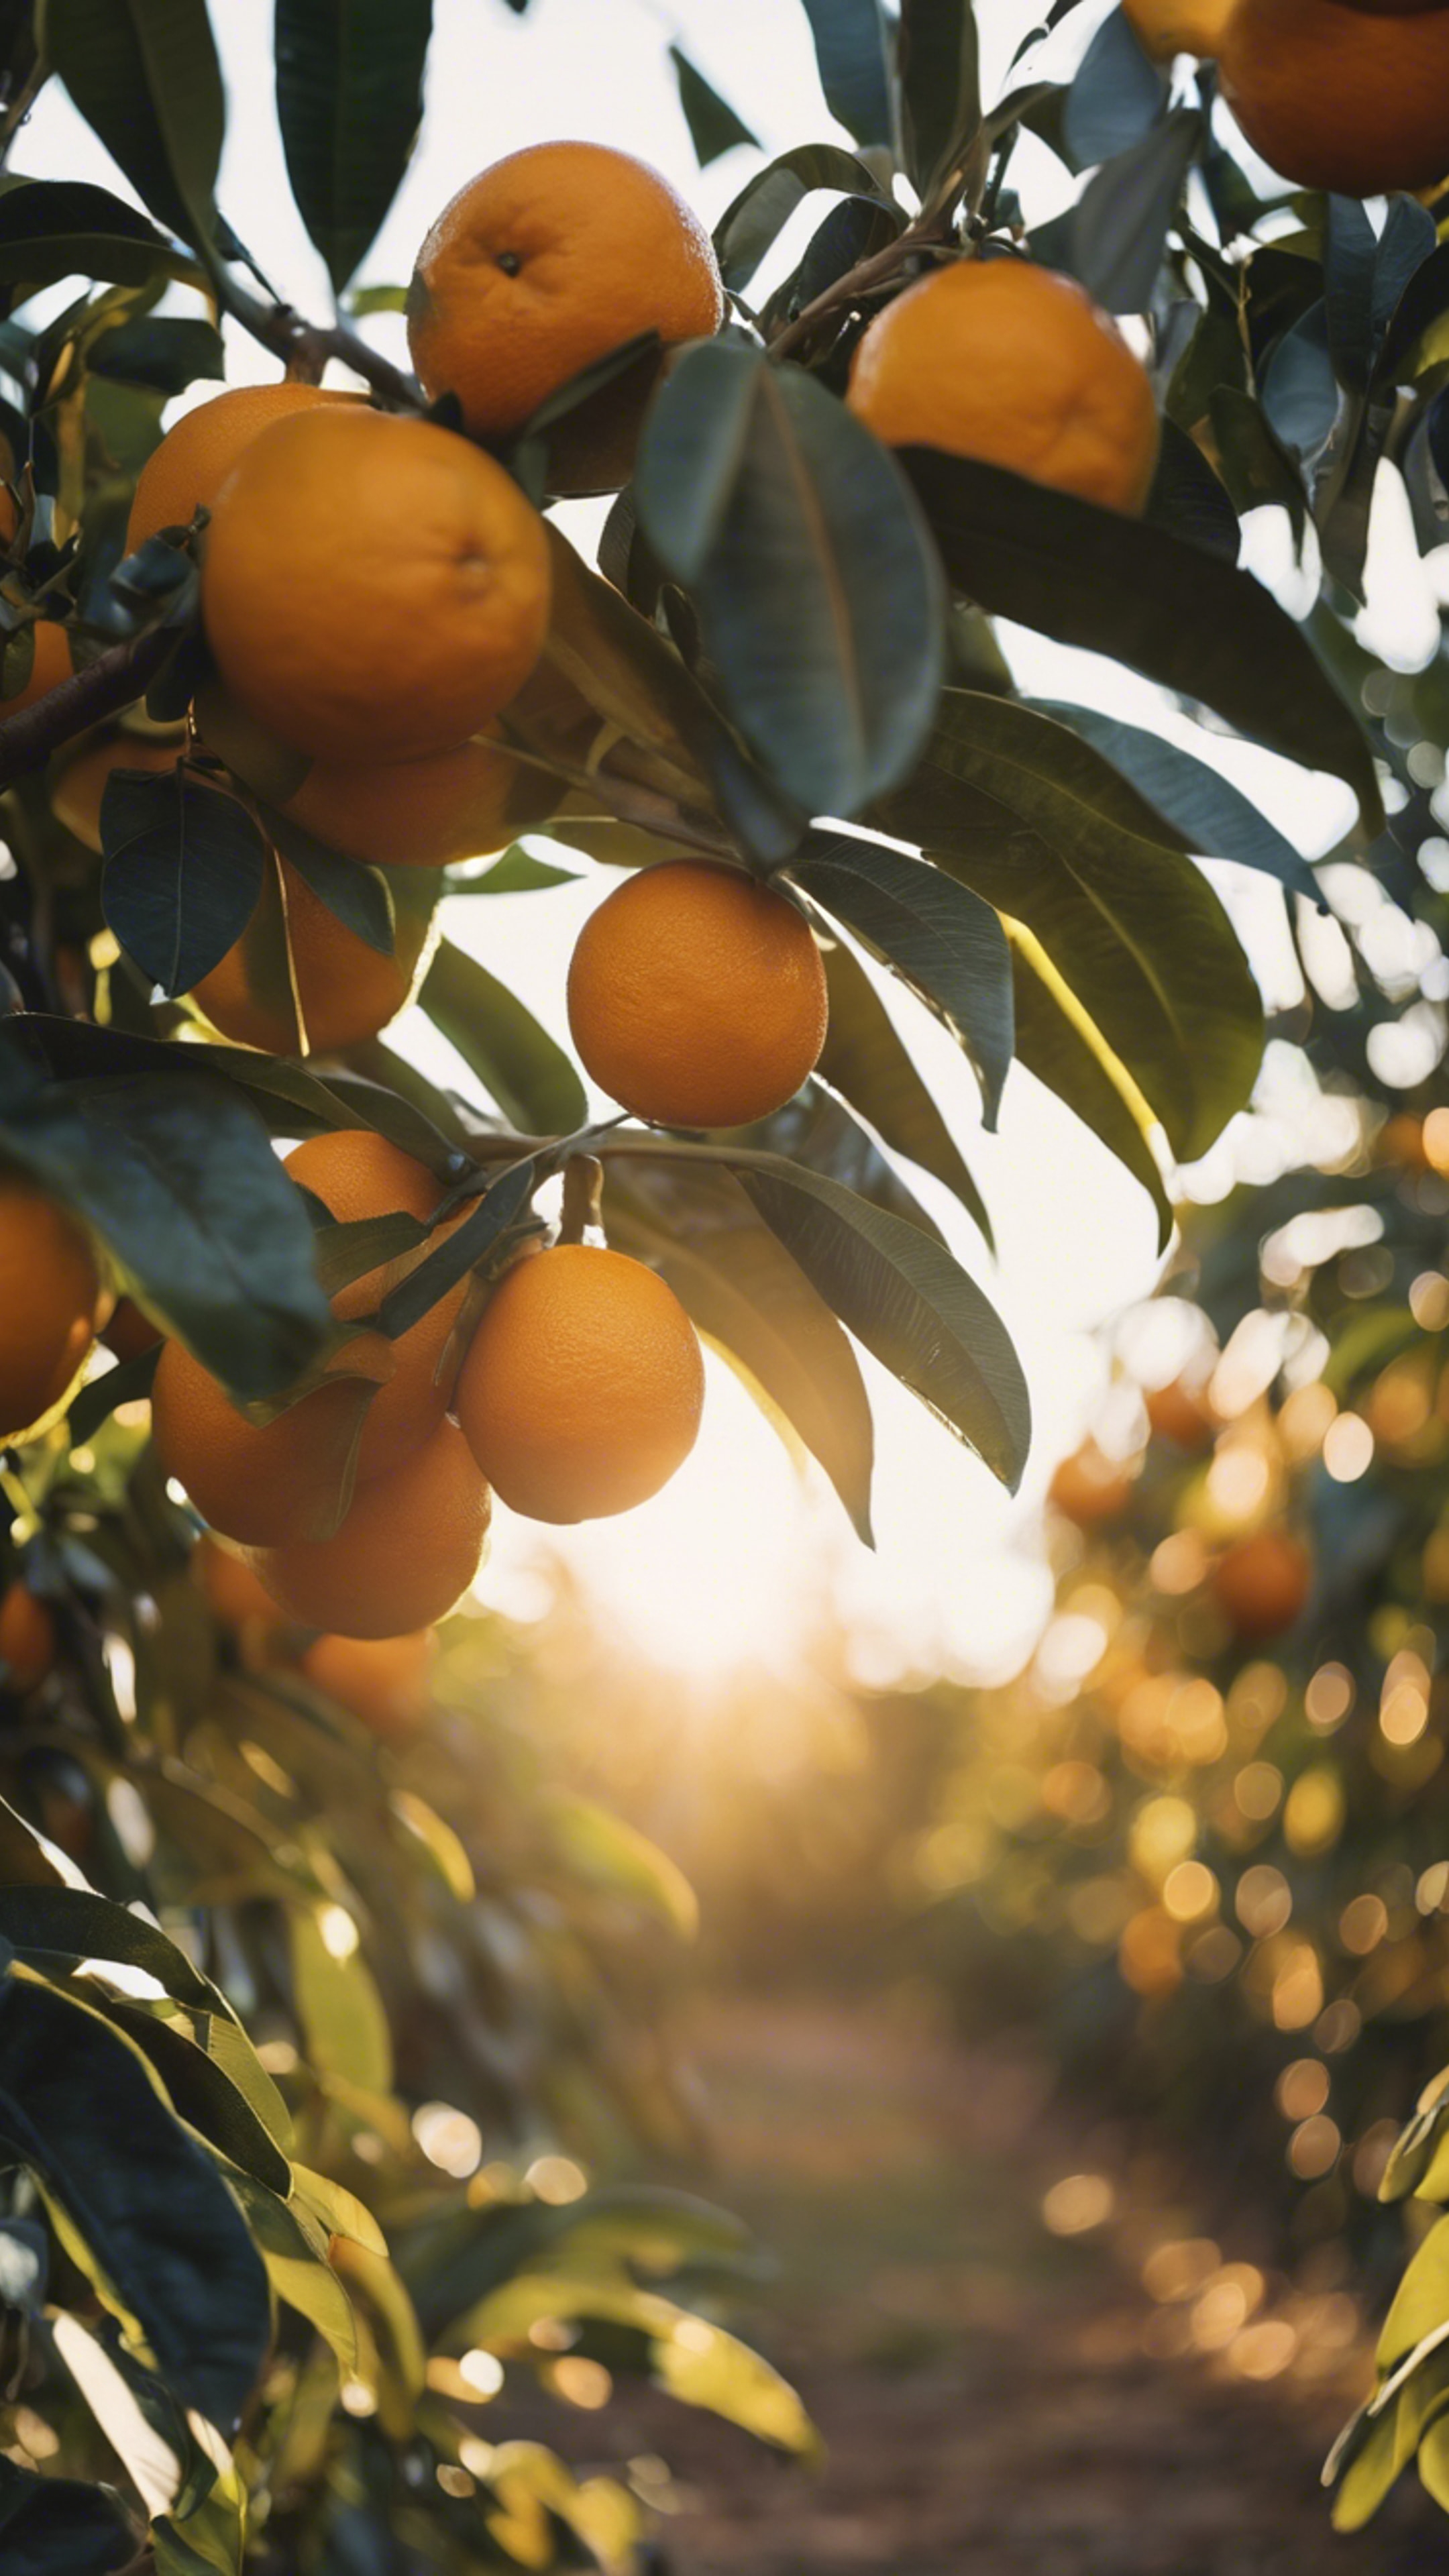 An orange grove in central Florida, with the sun casting a golden hue over ripe oranges ready for harvest. Wallpaper[4bbebc31cb8441e2b681]